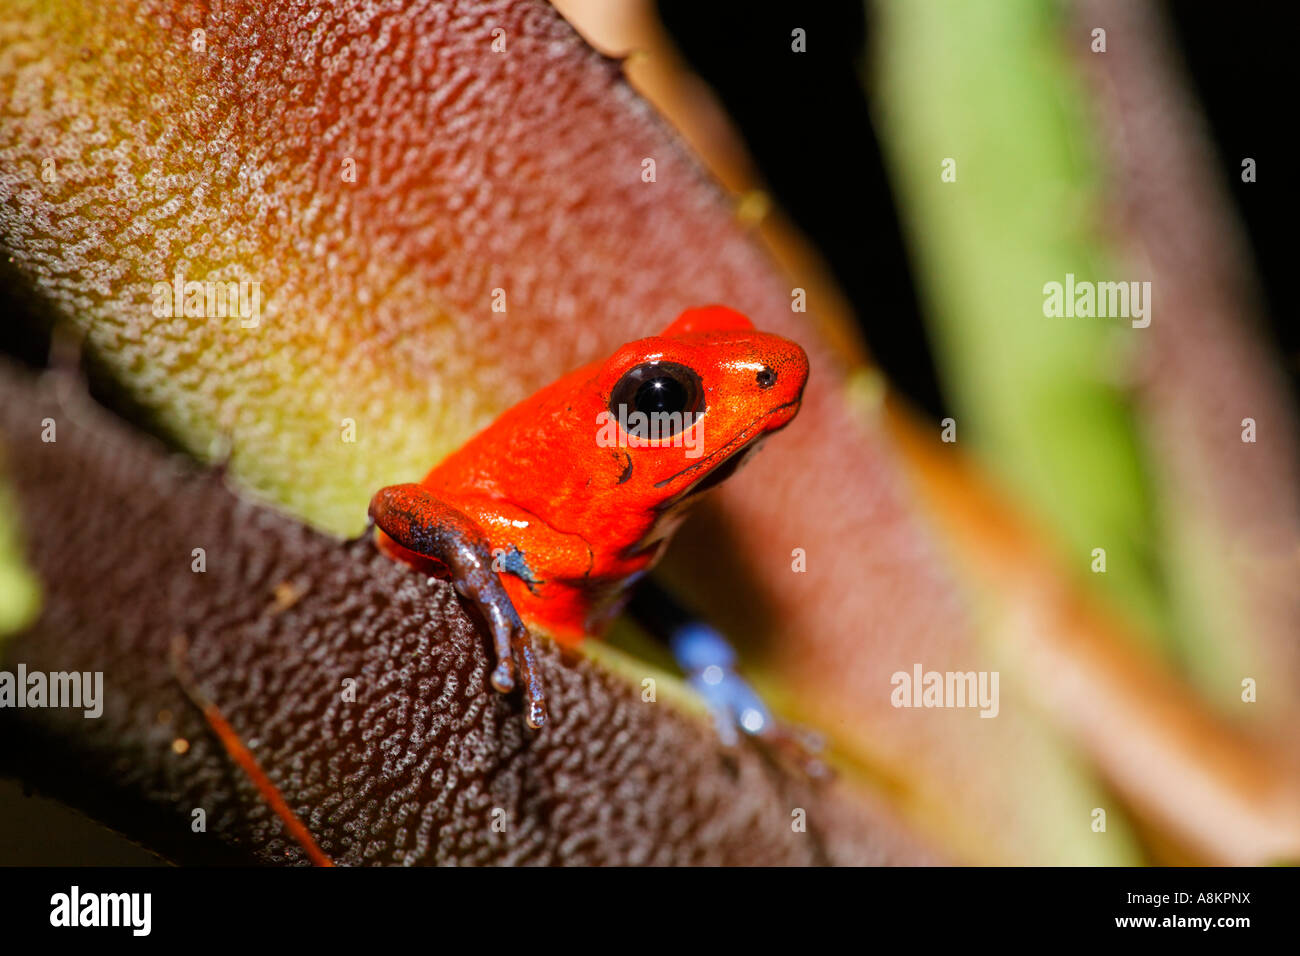 Red and Blue 'Blue Jeans' poison dart frog, Strawberry Poison Dart Frog, Poisoned dart frog, poison arrow frog, Bluejeans frog, Stock Photo